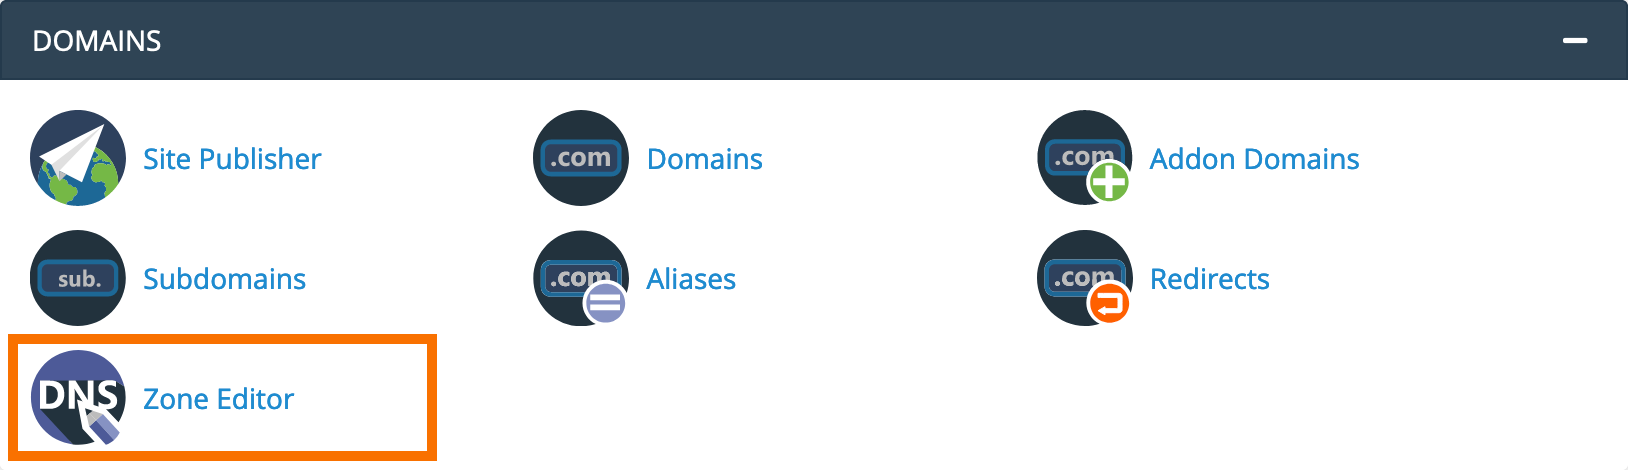 How to edit DNS zone in cPanel